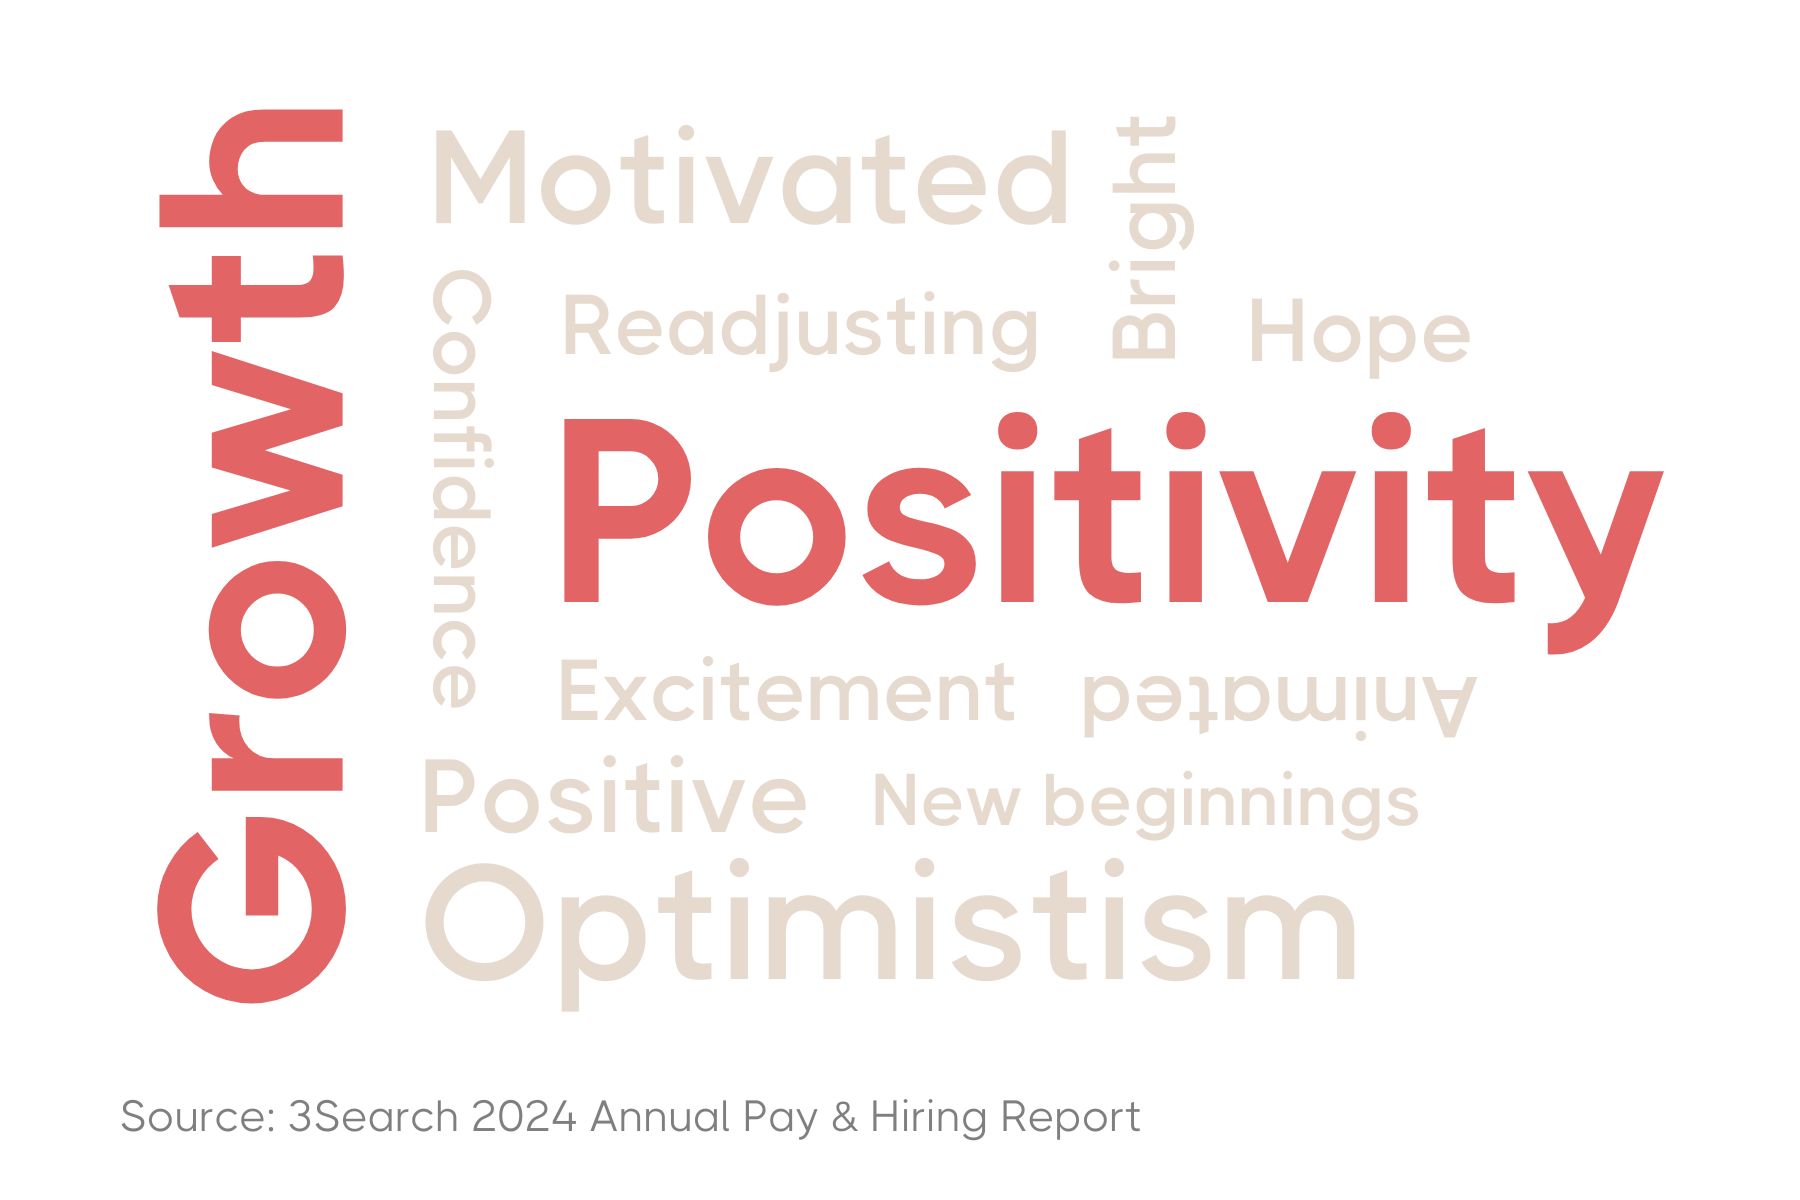 A word cloud with varying shades of red and grey text against a white background. The most prominent word in the center is 'Positivity' in bold red. Surrounding it are other positive words in different sizes and opacities, such as 'Growth', 'Optimism', 'Confidence', 'Motivated', 'Excitement', 'Readjusting', 'Bright', 'Hope', 'Positive', and 'New beginnings'. The text orientation varies, with some words vertical and others horizontal. At the bottom is a citation in grey text: 'Source: 3Search 2024 Annual Pay & Hiring Report'.